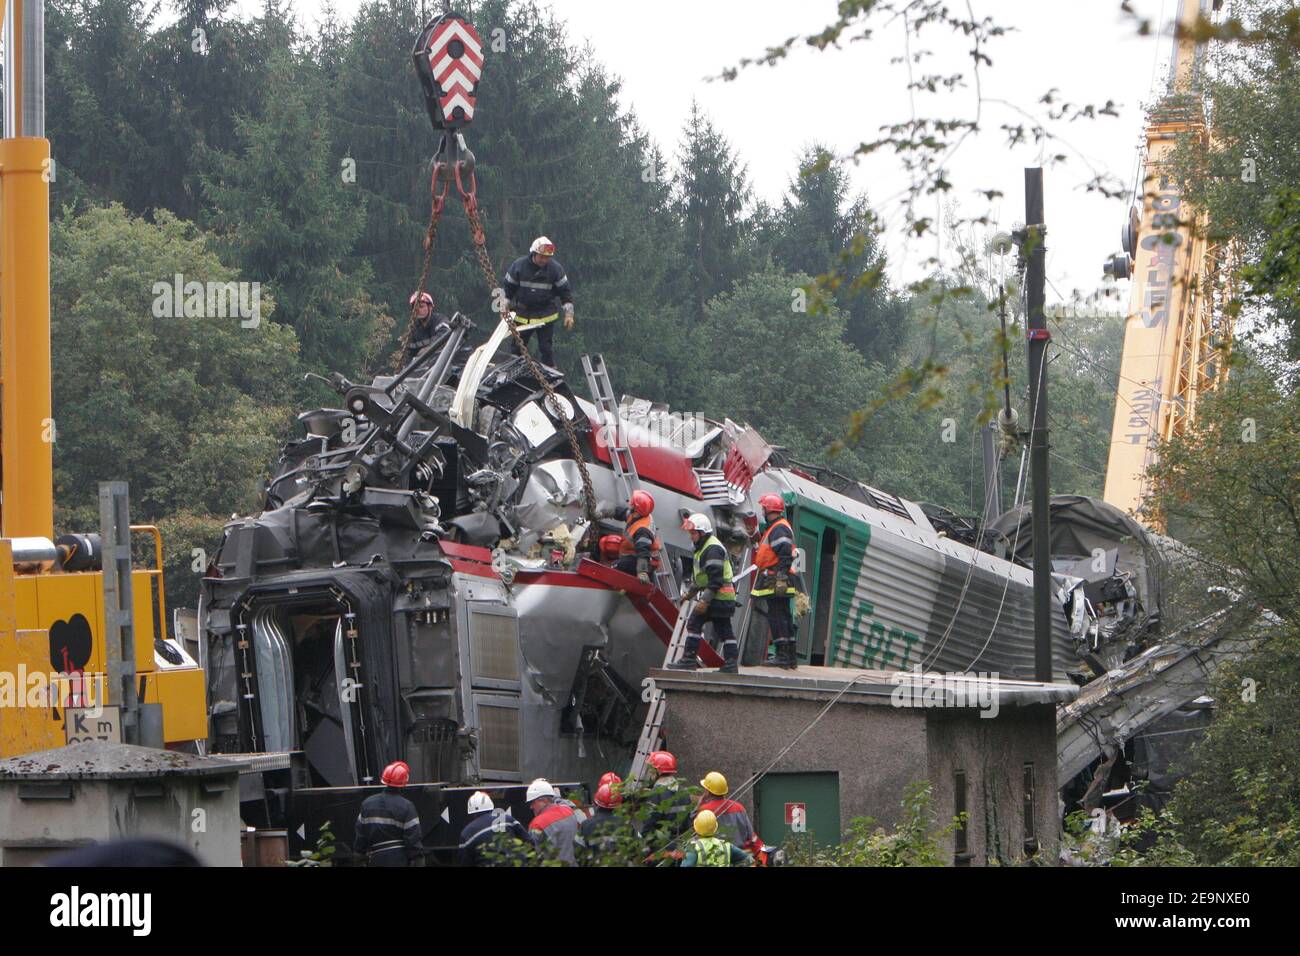 6 people were killed and more than 14 injured in a head-on collision between a passenger train and a goods train. The two trains were a double-decker Luxembourg-operated regional express train travelling from the grand duchy to the French city of Nancy, and a freight train heading for Luxembourg. Zoufftgen, France on October 12, 2006. Photo by Bernard Bisson/ABACAPRESS.COM Stock Photo